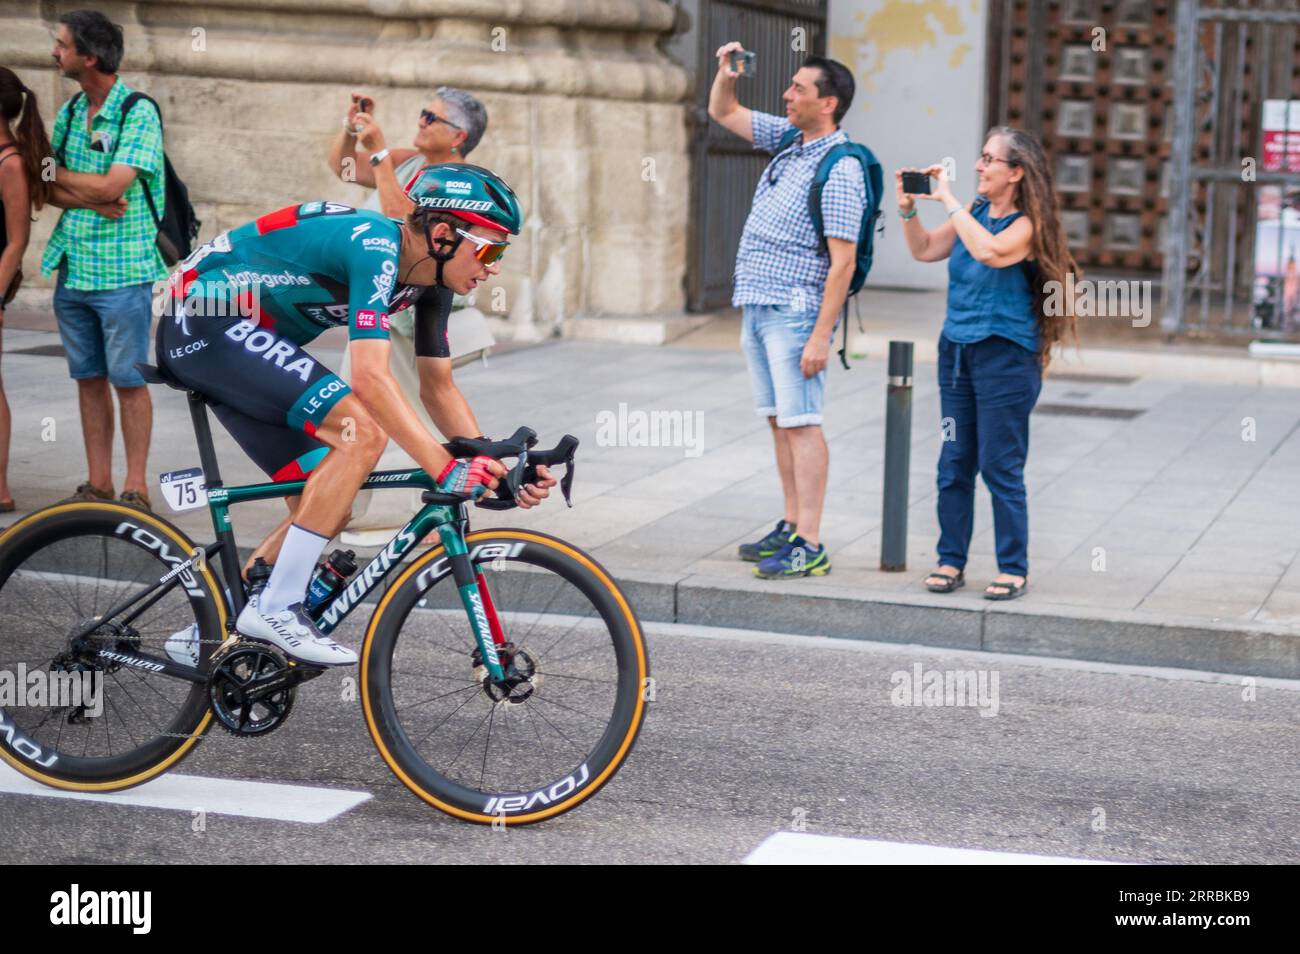 The 12th stage of the Vuelta a España, one of the leading cycling races in the international calendar, reaches Zaragoza, Aragon, Spain, 7th September Stock Photo